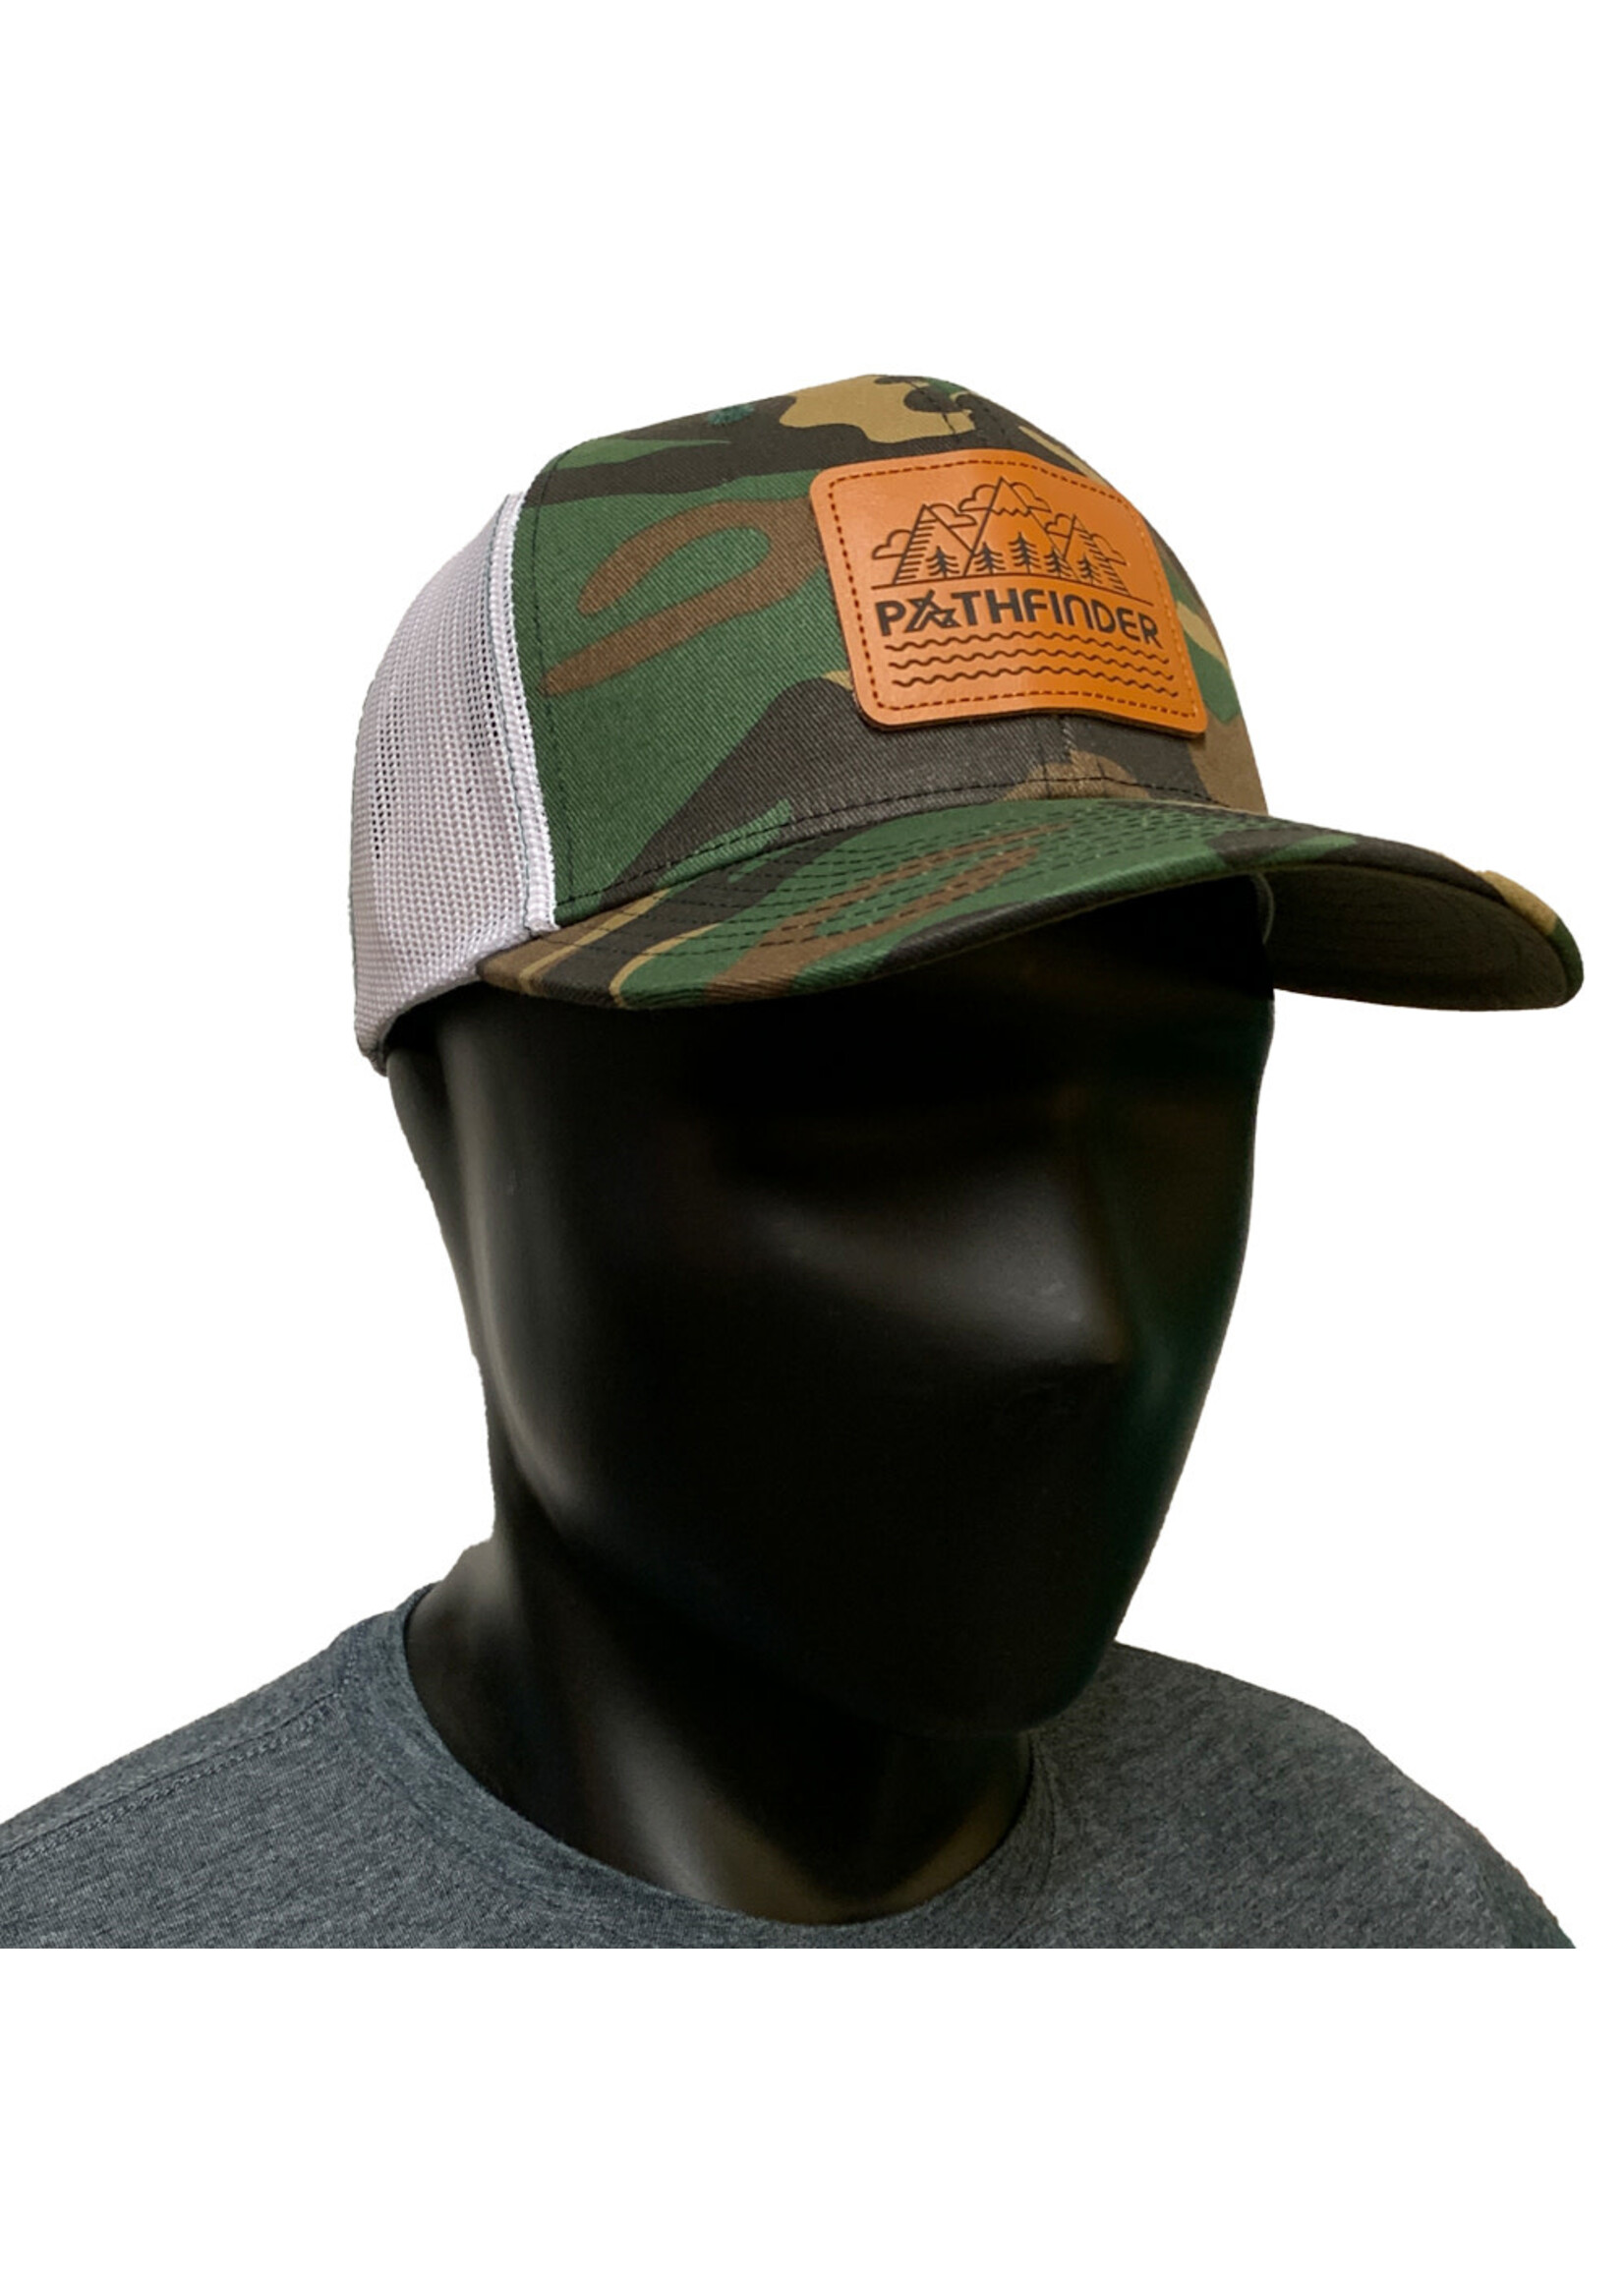 Pathfinder Mesh Back Trucker Leather Linescape